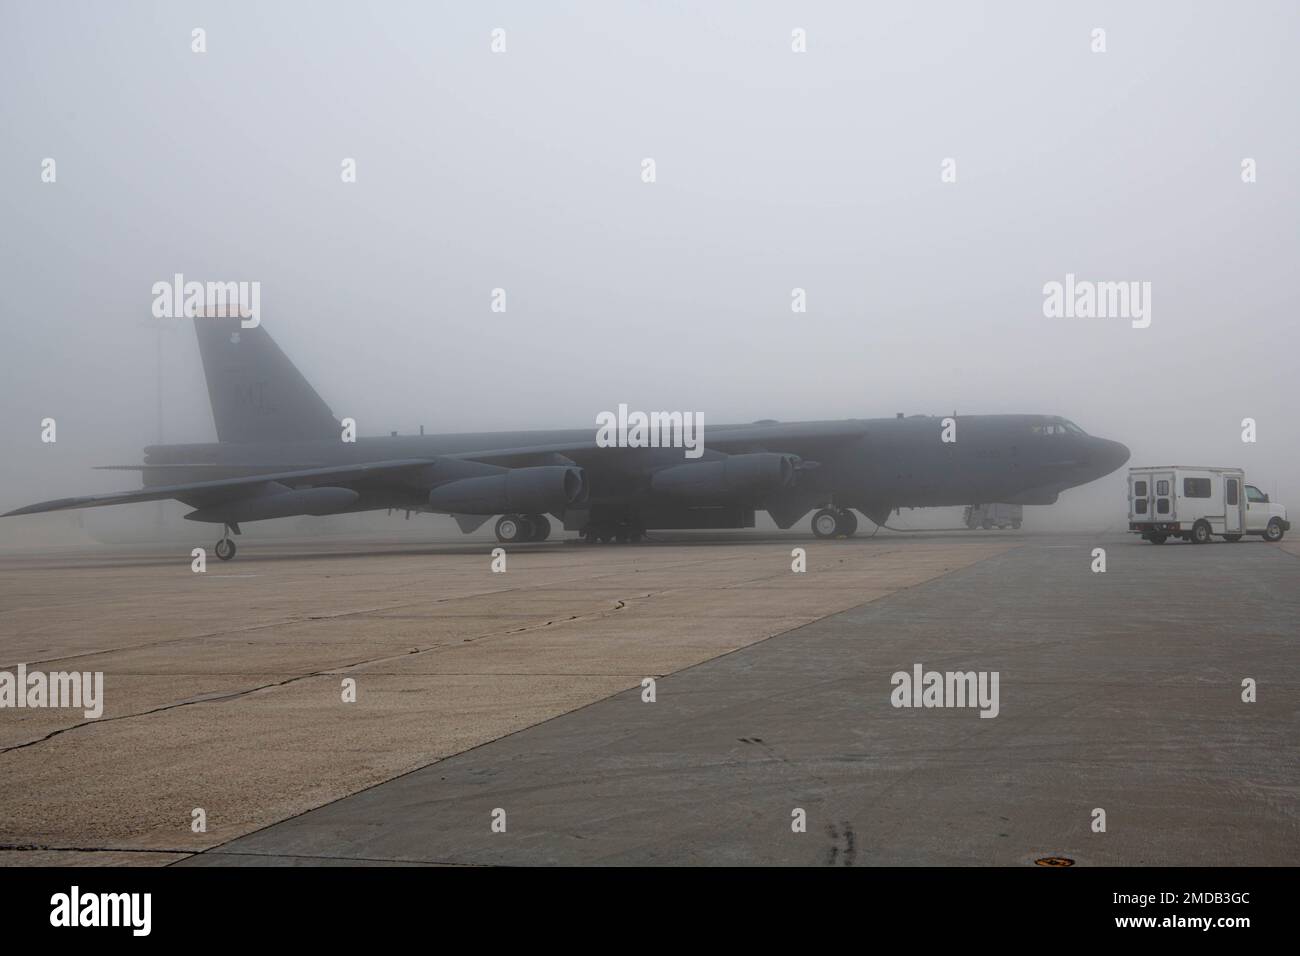 A B52H Stratofortress sits on a flight line preparing for flight at Minot Air Force Base, North Dakota, July 15, 2022. The B52H stands 45 feet tall, has a wingspan of 187 feet and the wings can flex up to 5 feet up up and down. Stock Photo